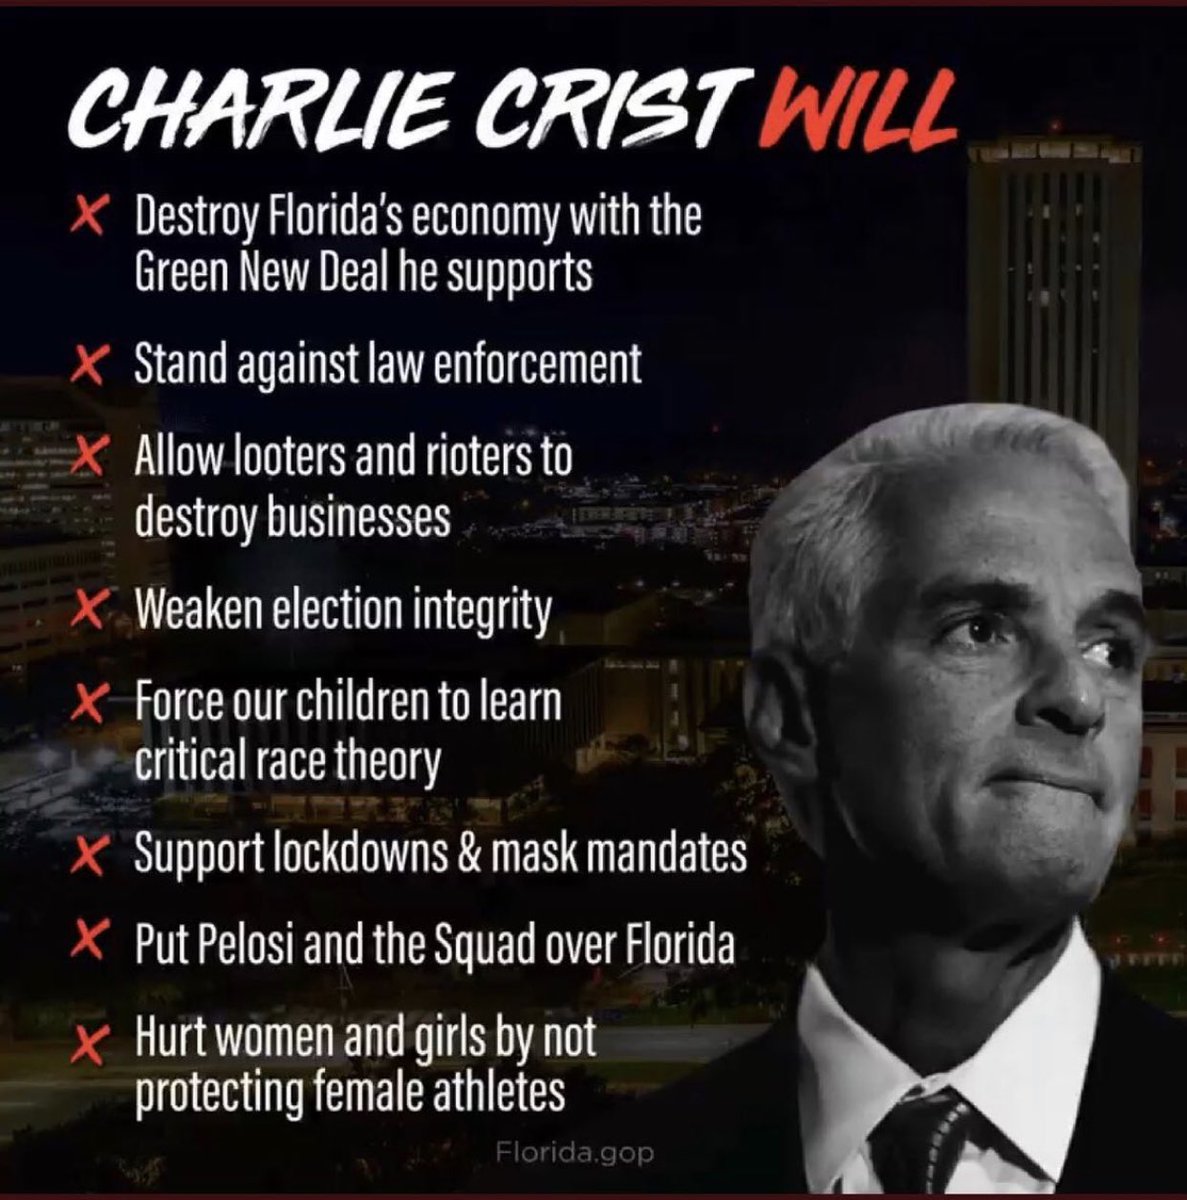 Charlie Crist on Twitter: "Retweet if you want to defeat @GovRonDeSantis so  we can build a Florida for All!" / Twitter